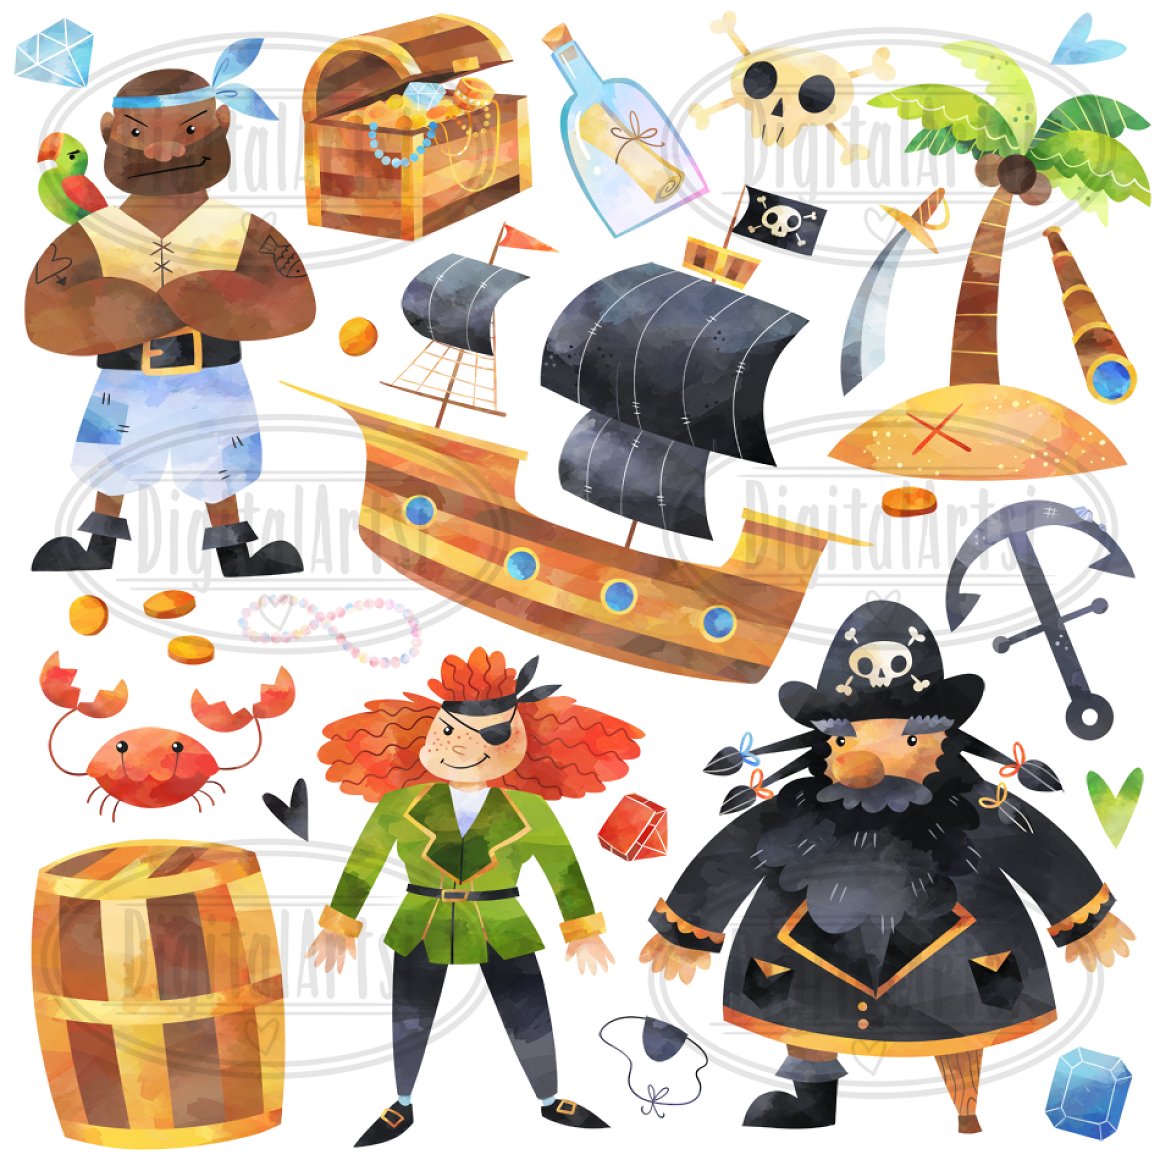 Some pirate's characters for your cartoon.